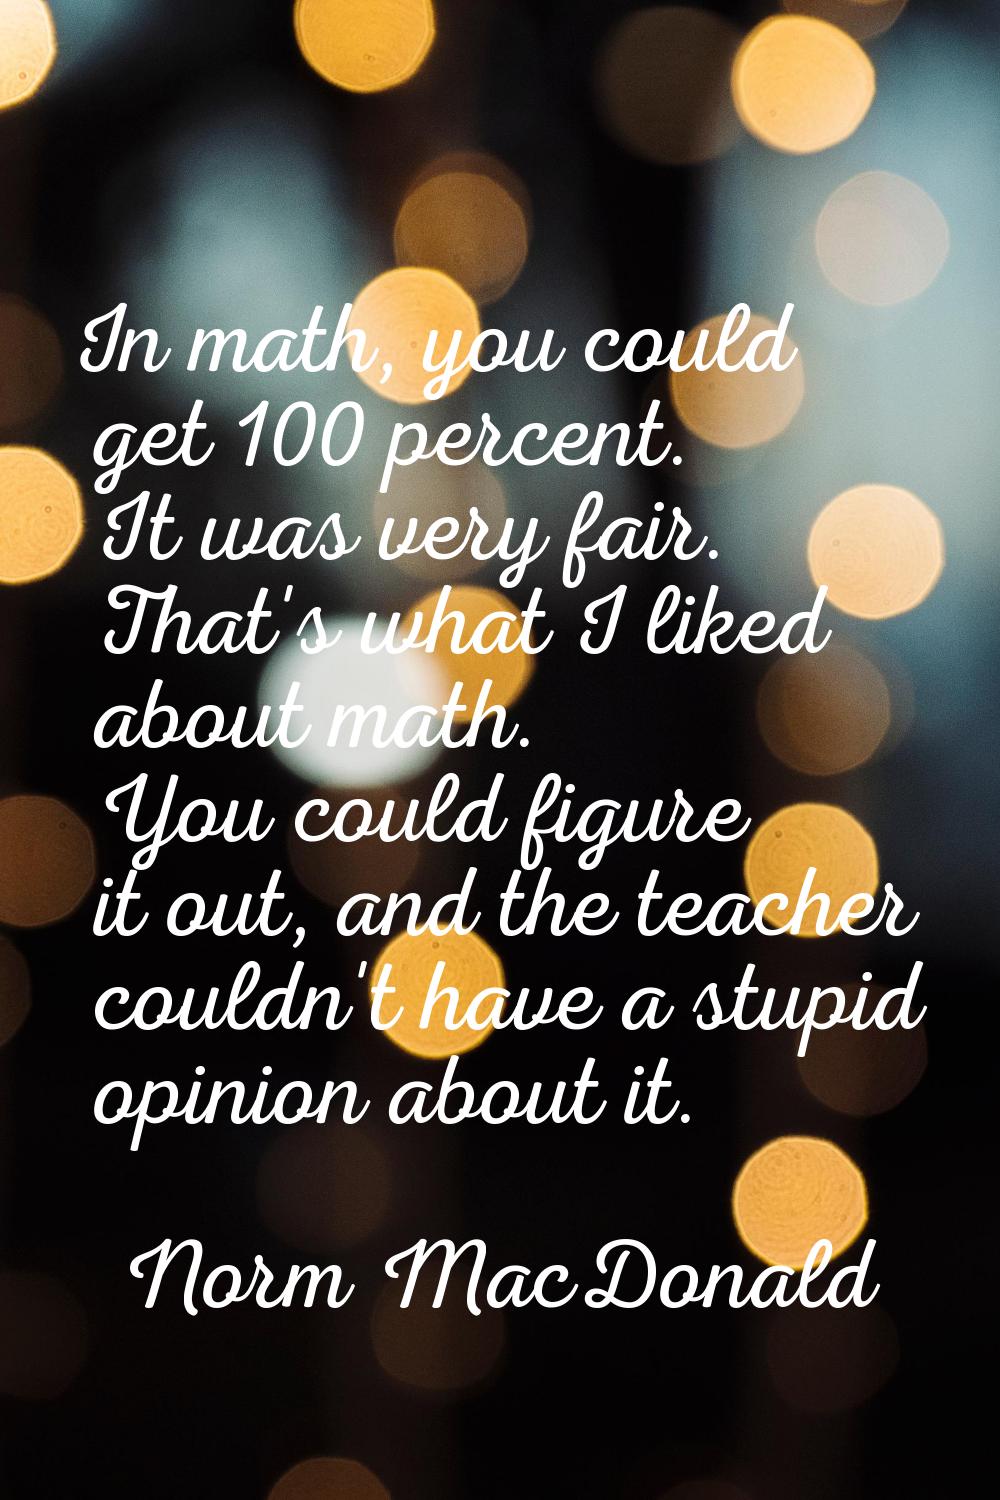 In math, you could get 100 percent. It was very fair. That's what I liked about math. You could fig